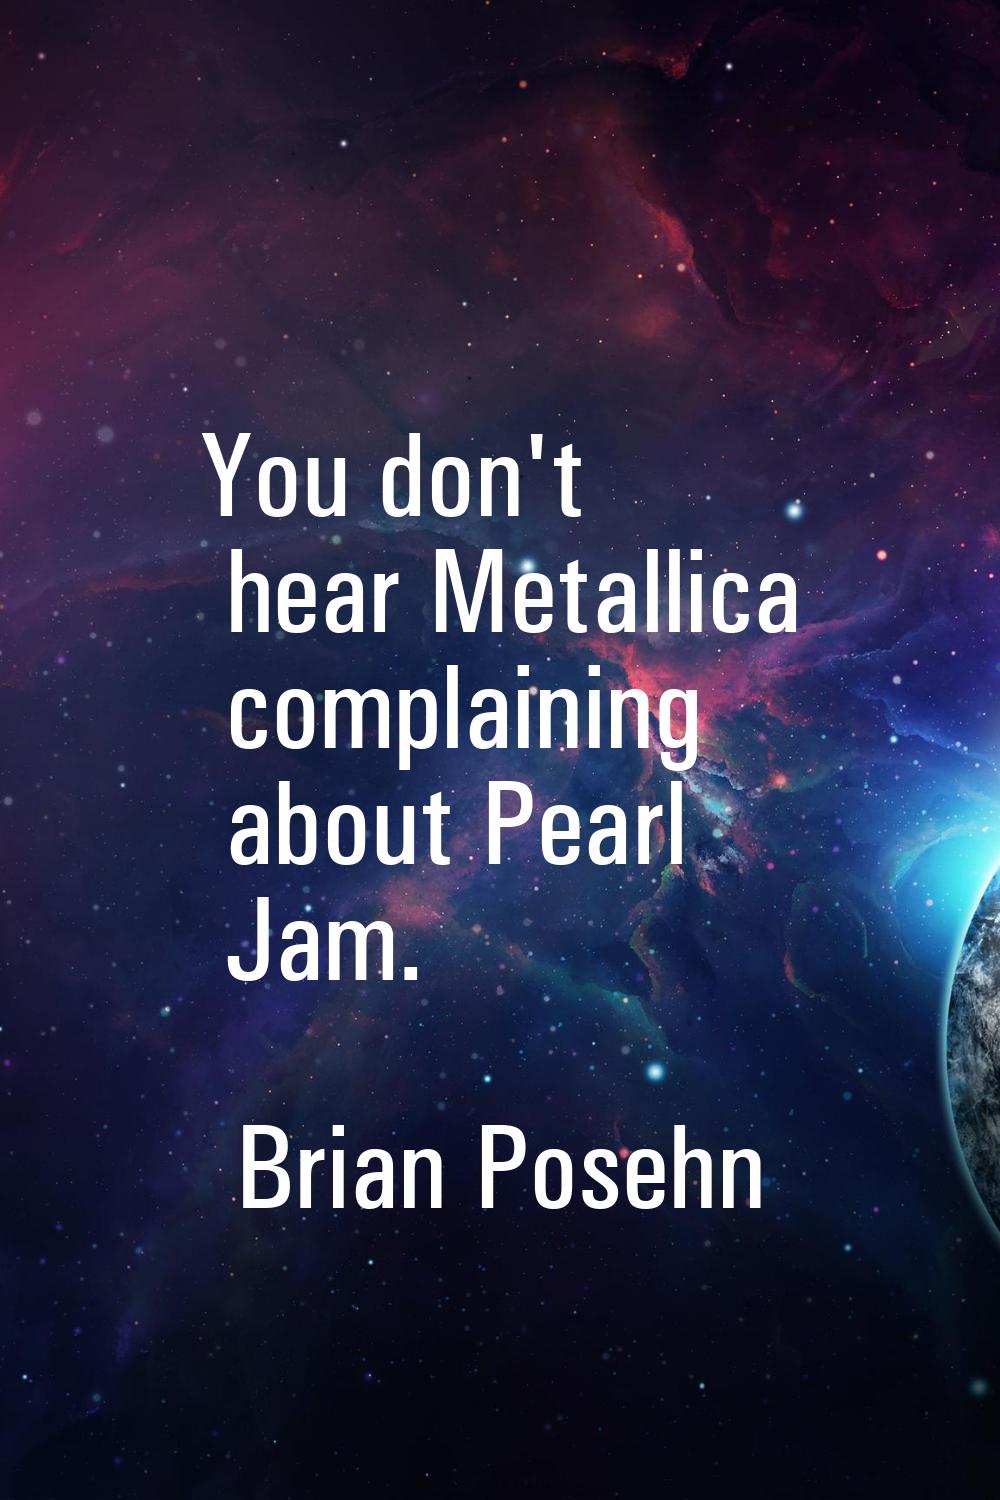 You don't hear Metallica complaining about Pearl Jam.